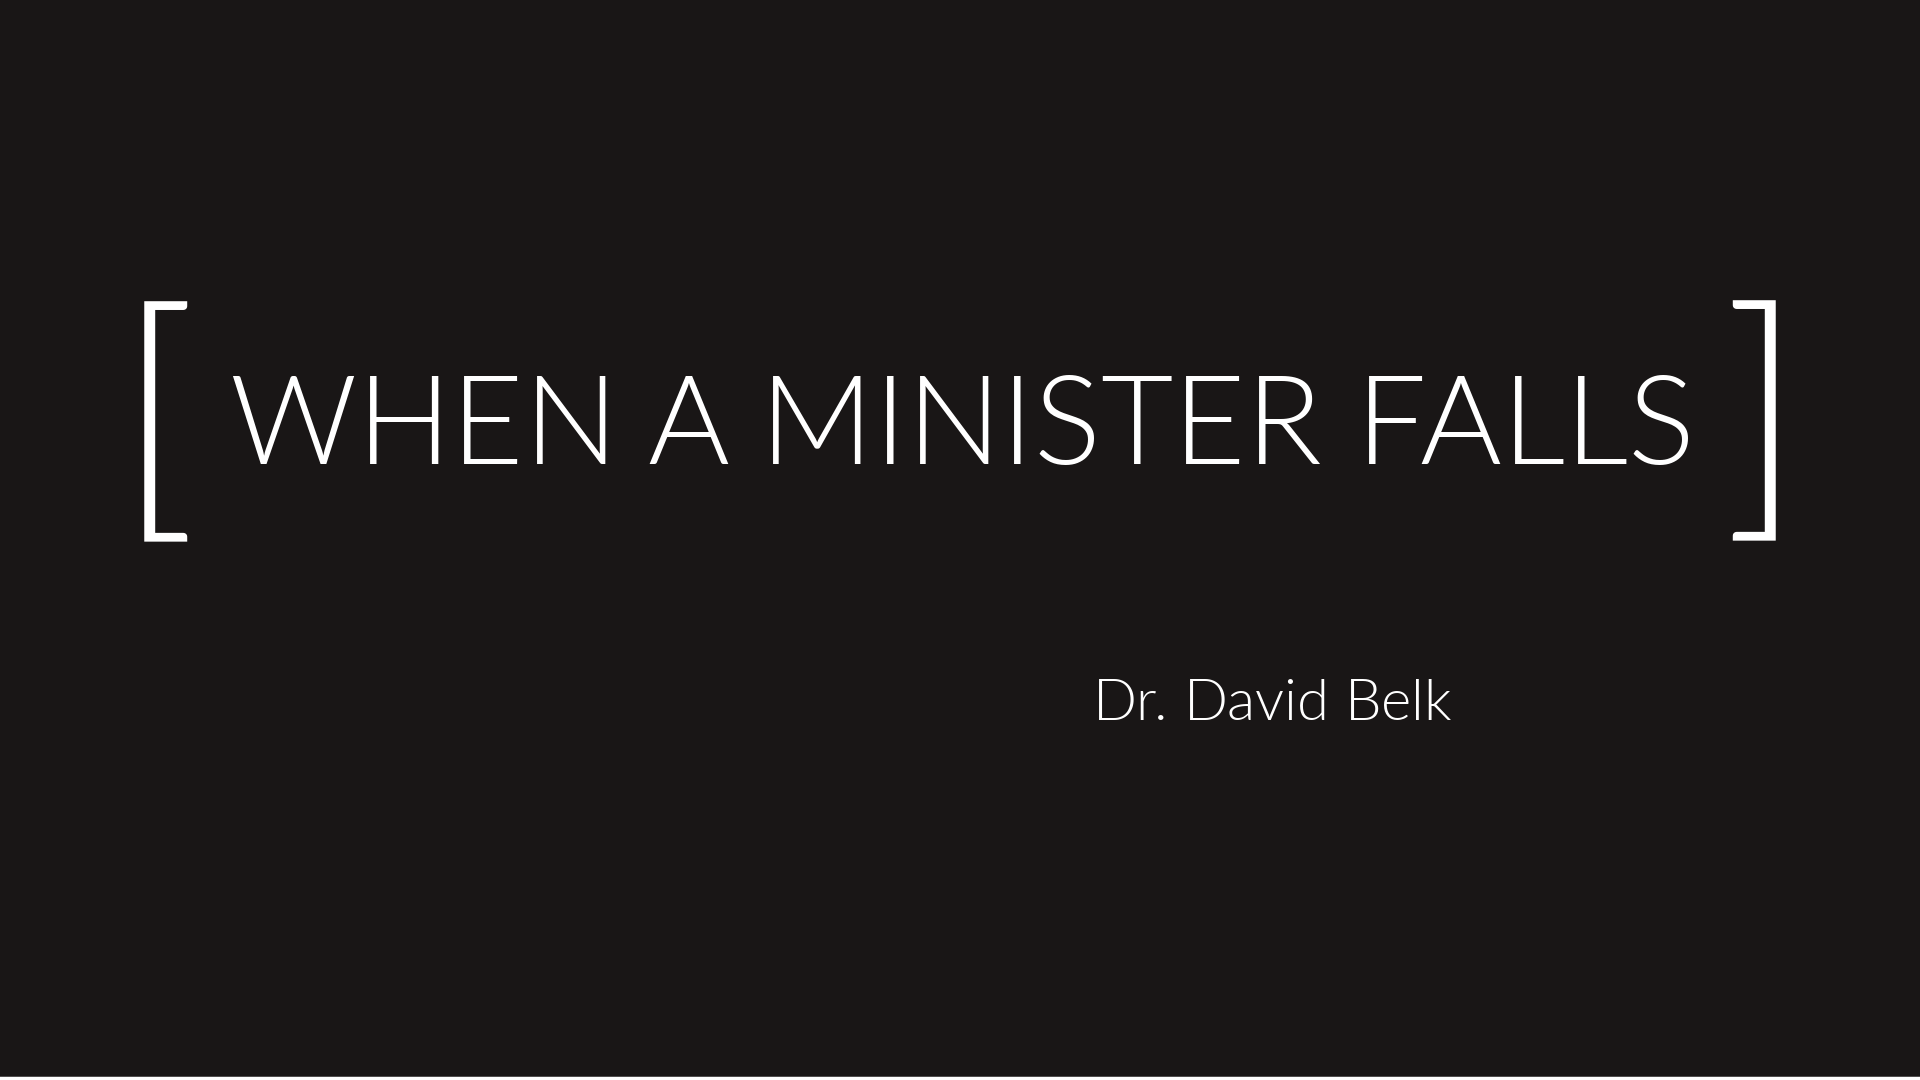 When A Minister Falls